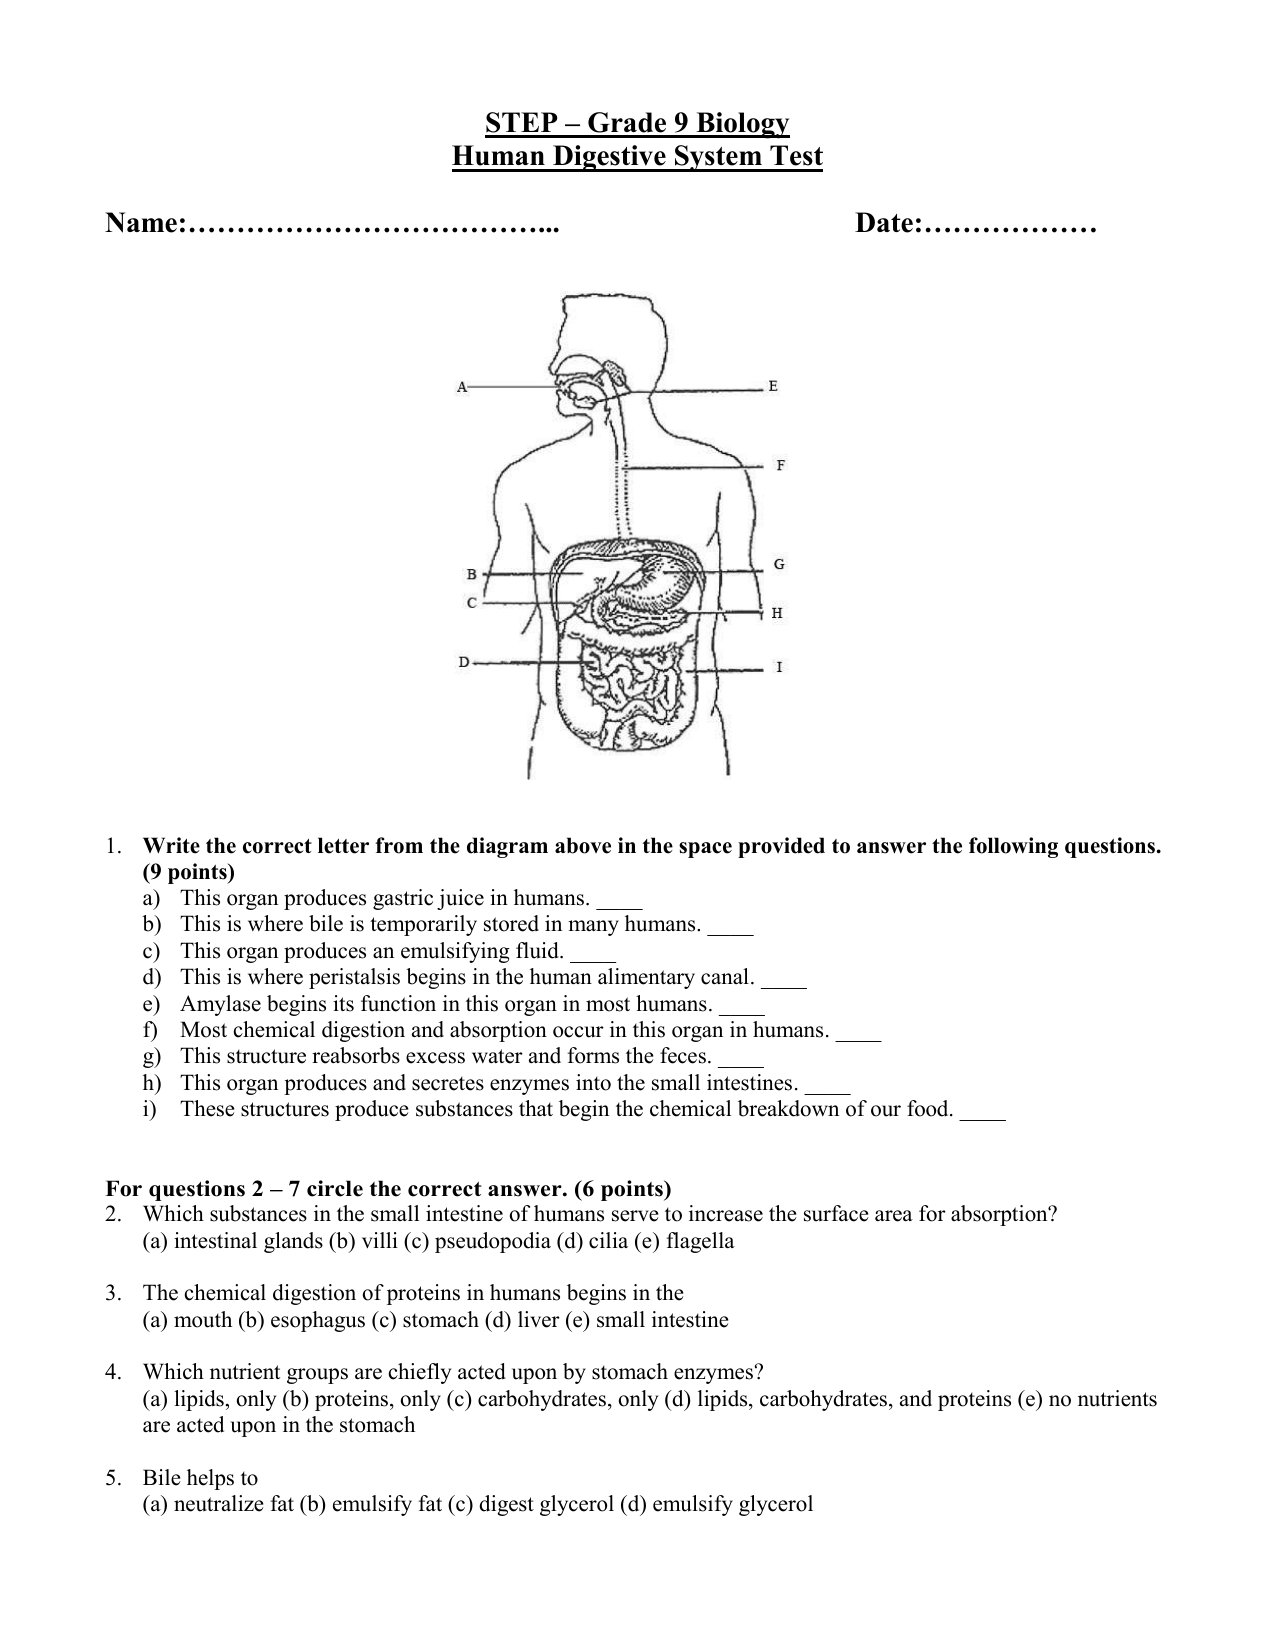 digestive system critical thinking questions